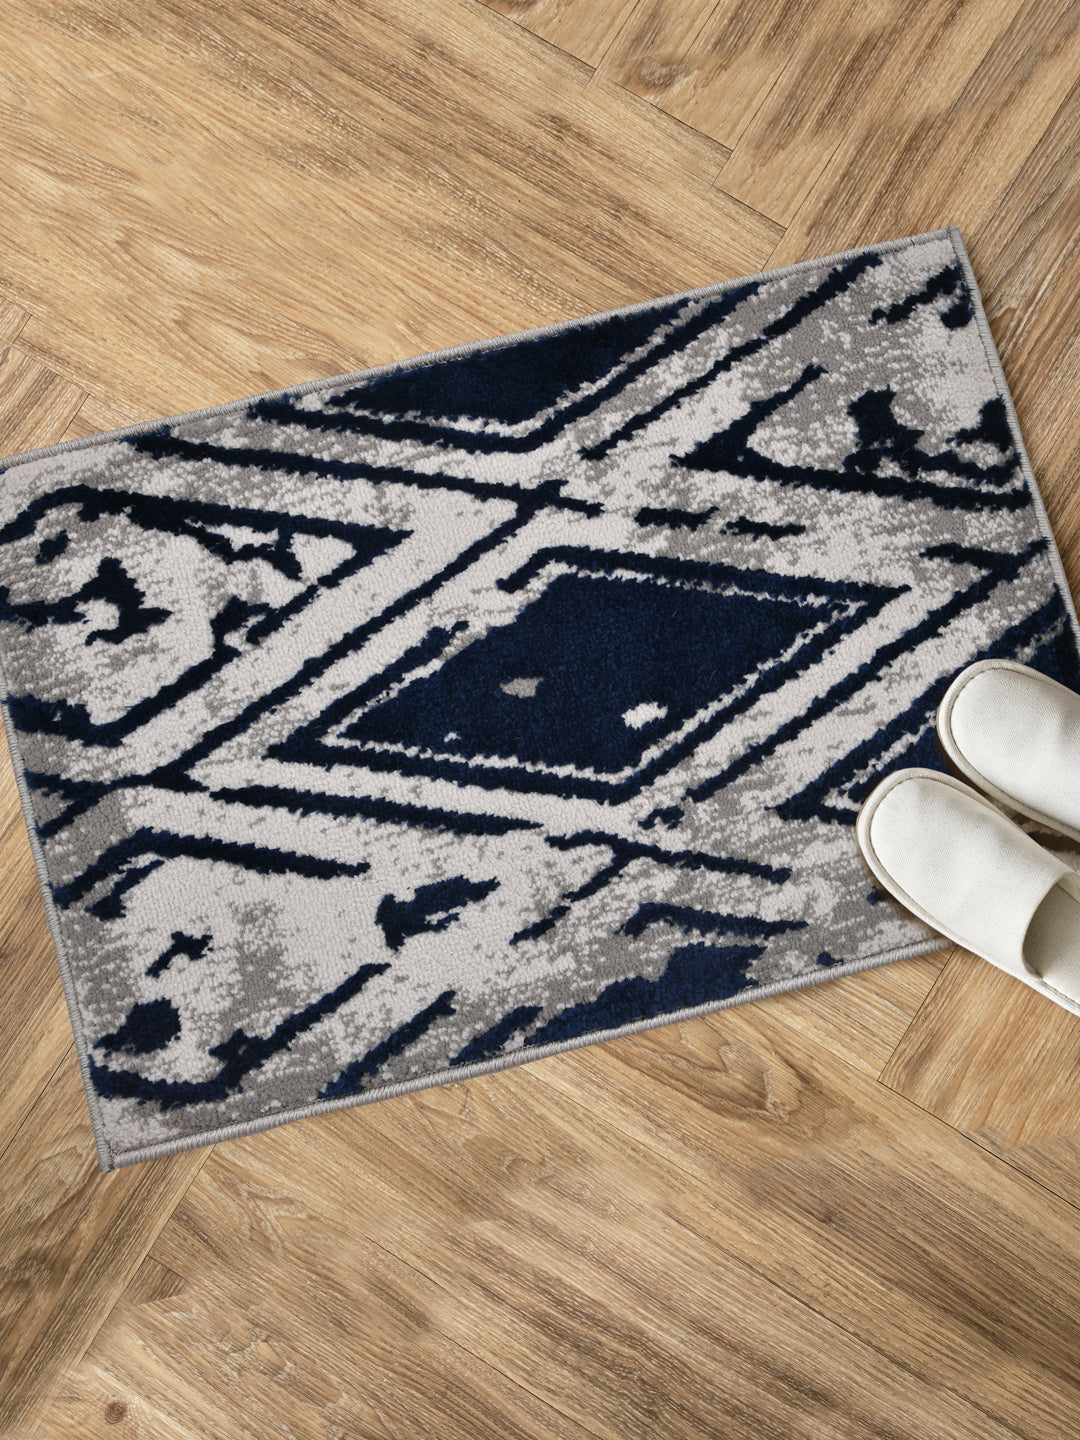 Doormat With Anti Skid Backing; 16x24 Inches; Blue Grey